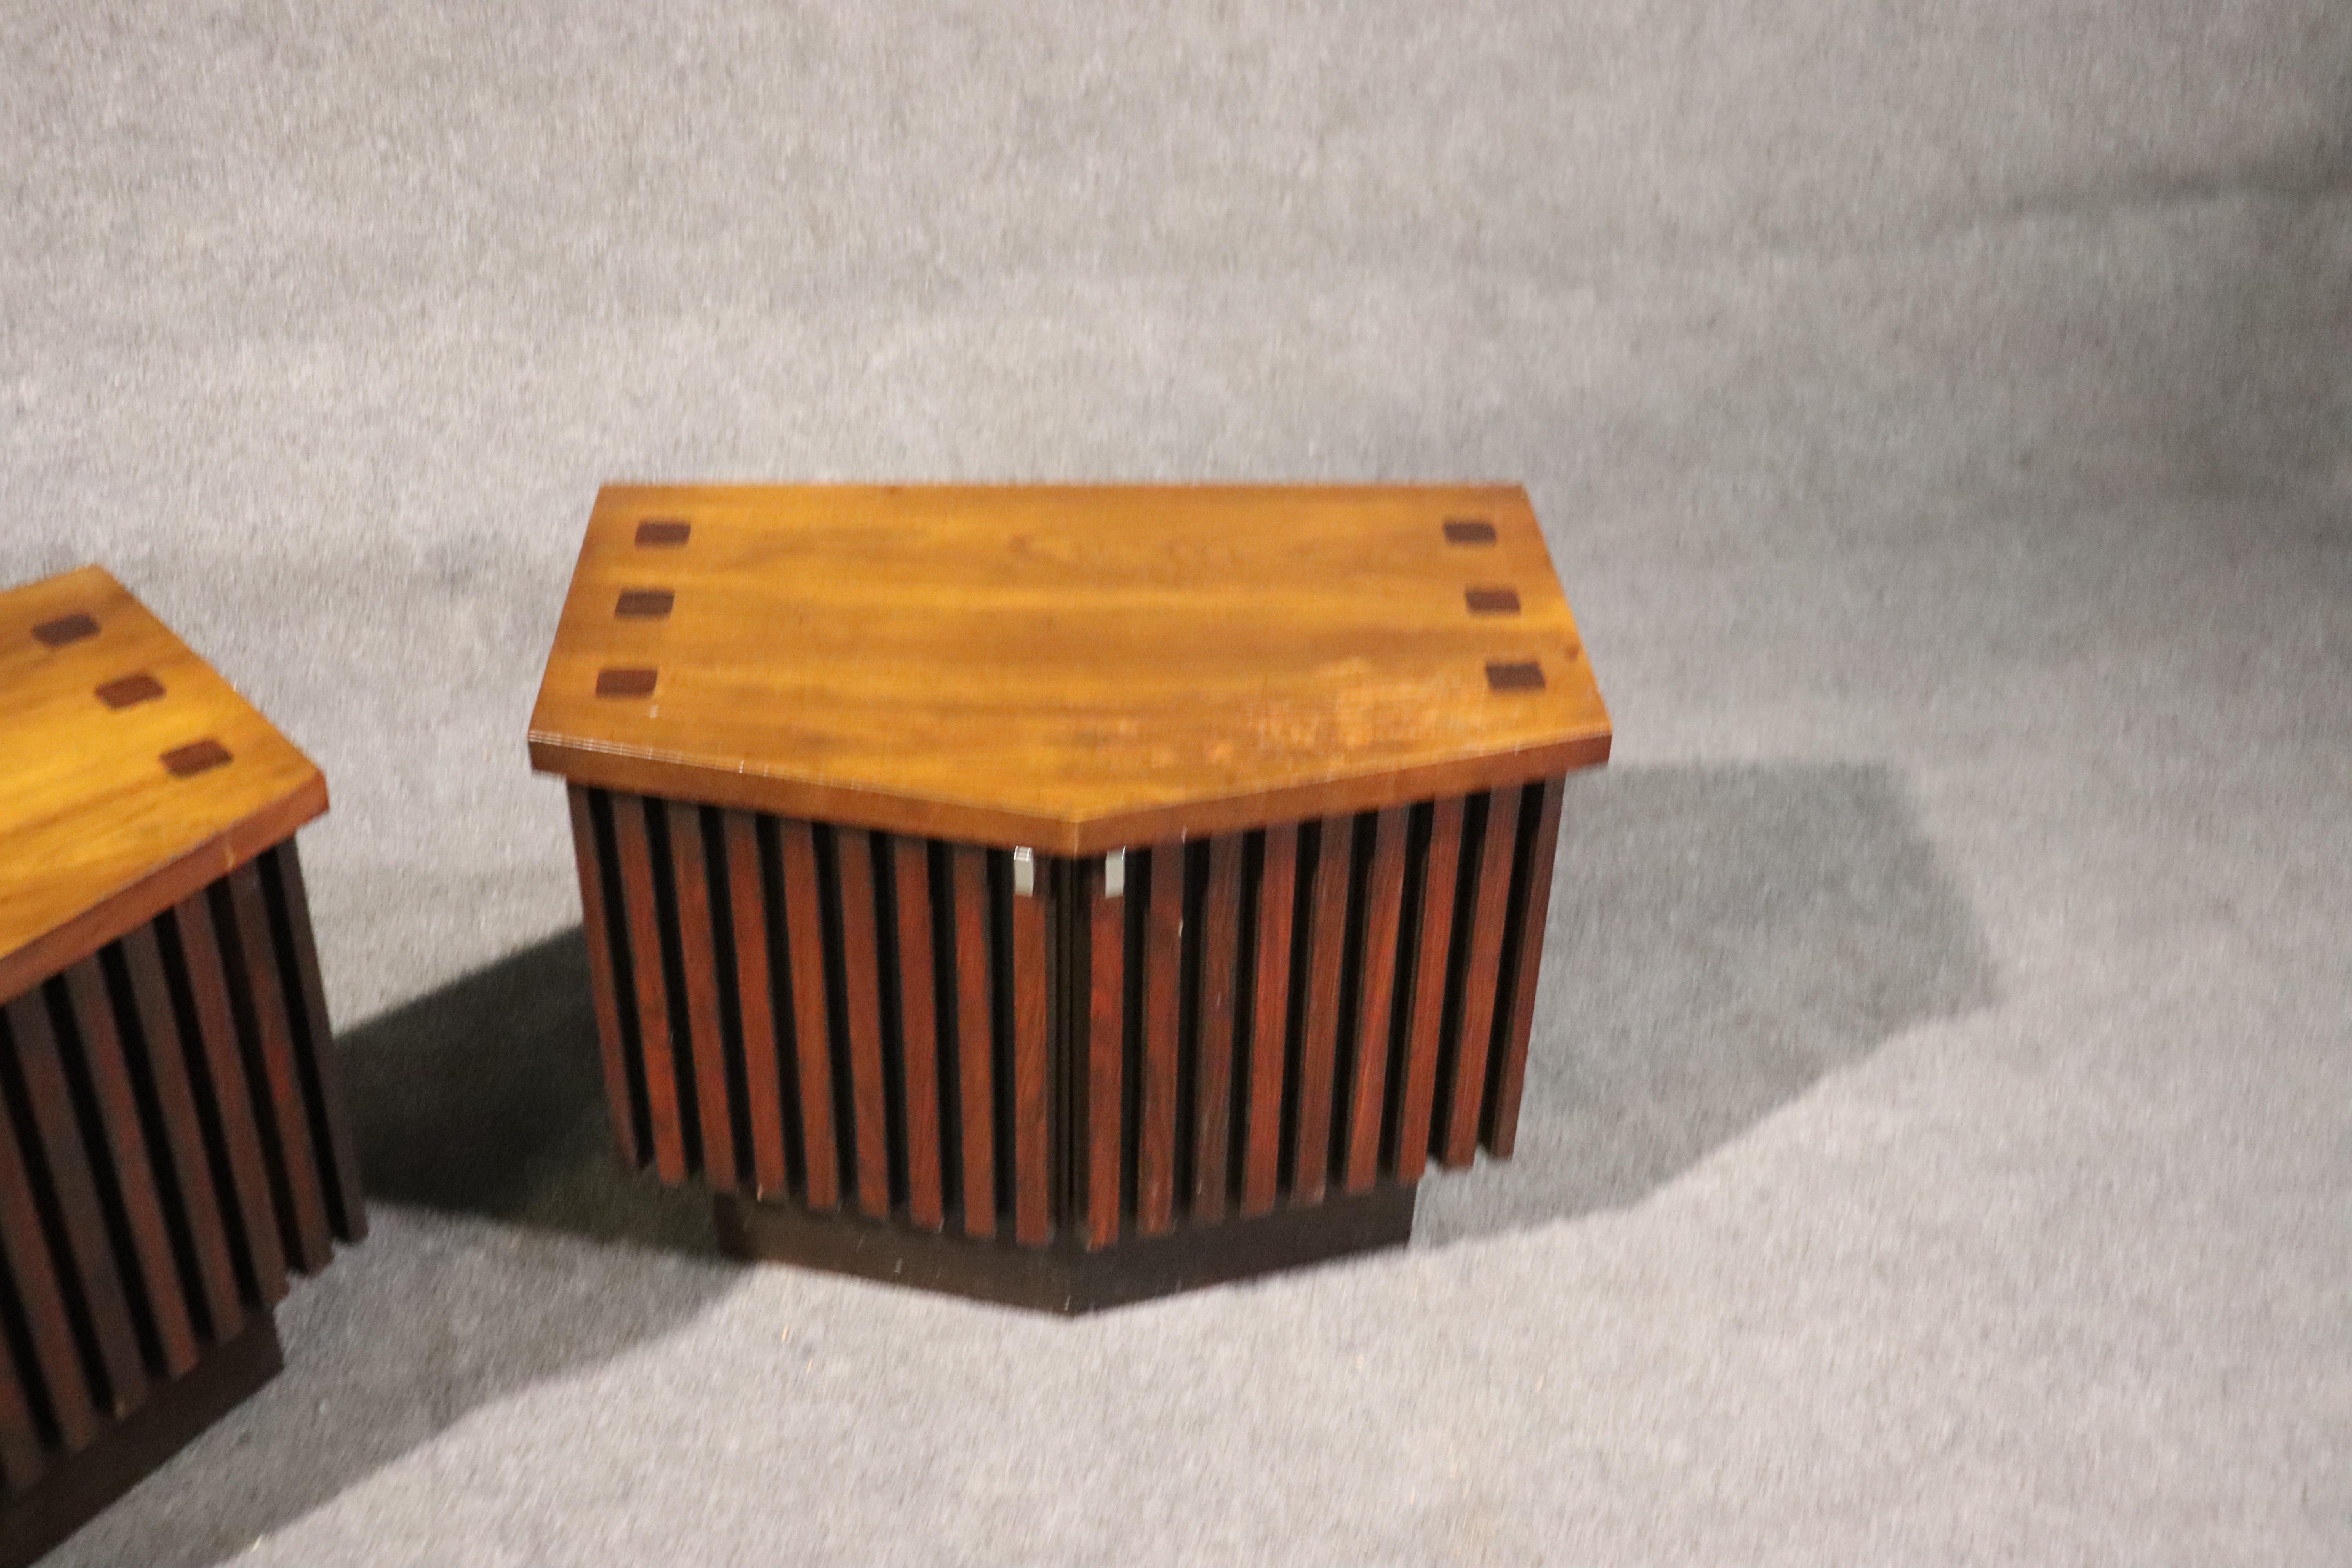 American Pair of Mid-Century Modern Lane Rosewood and Walnut Nightstand Tables circa 1960